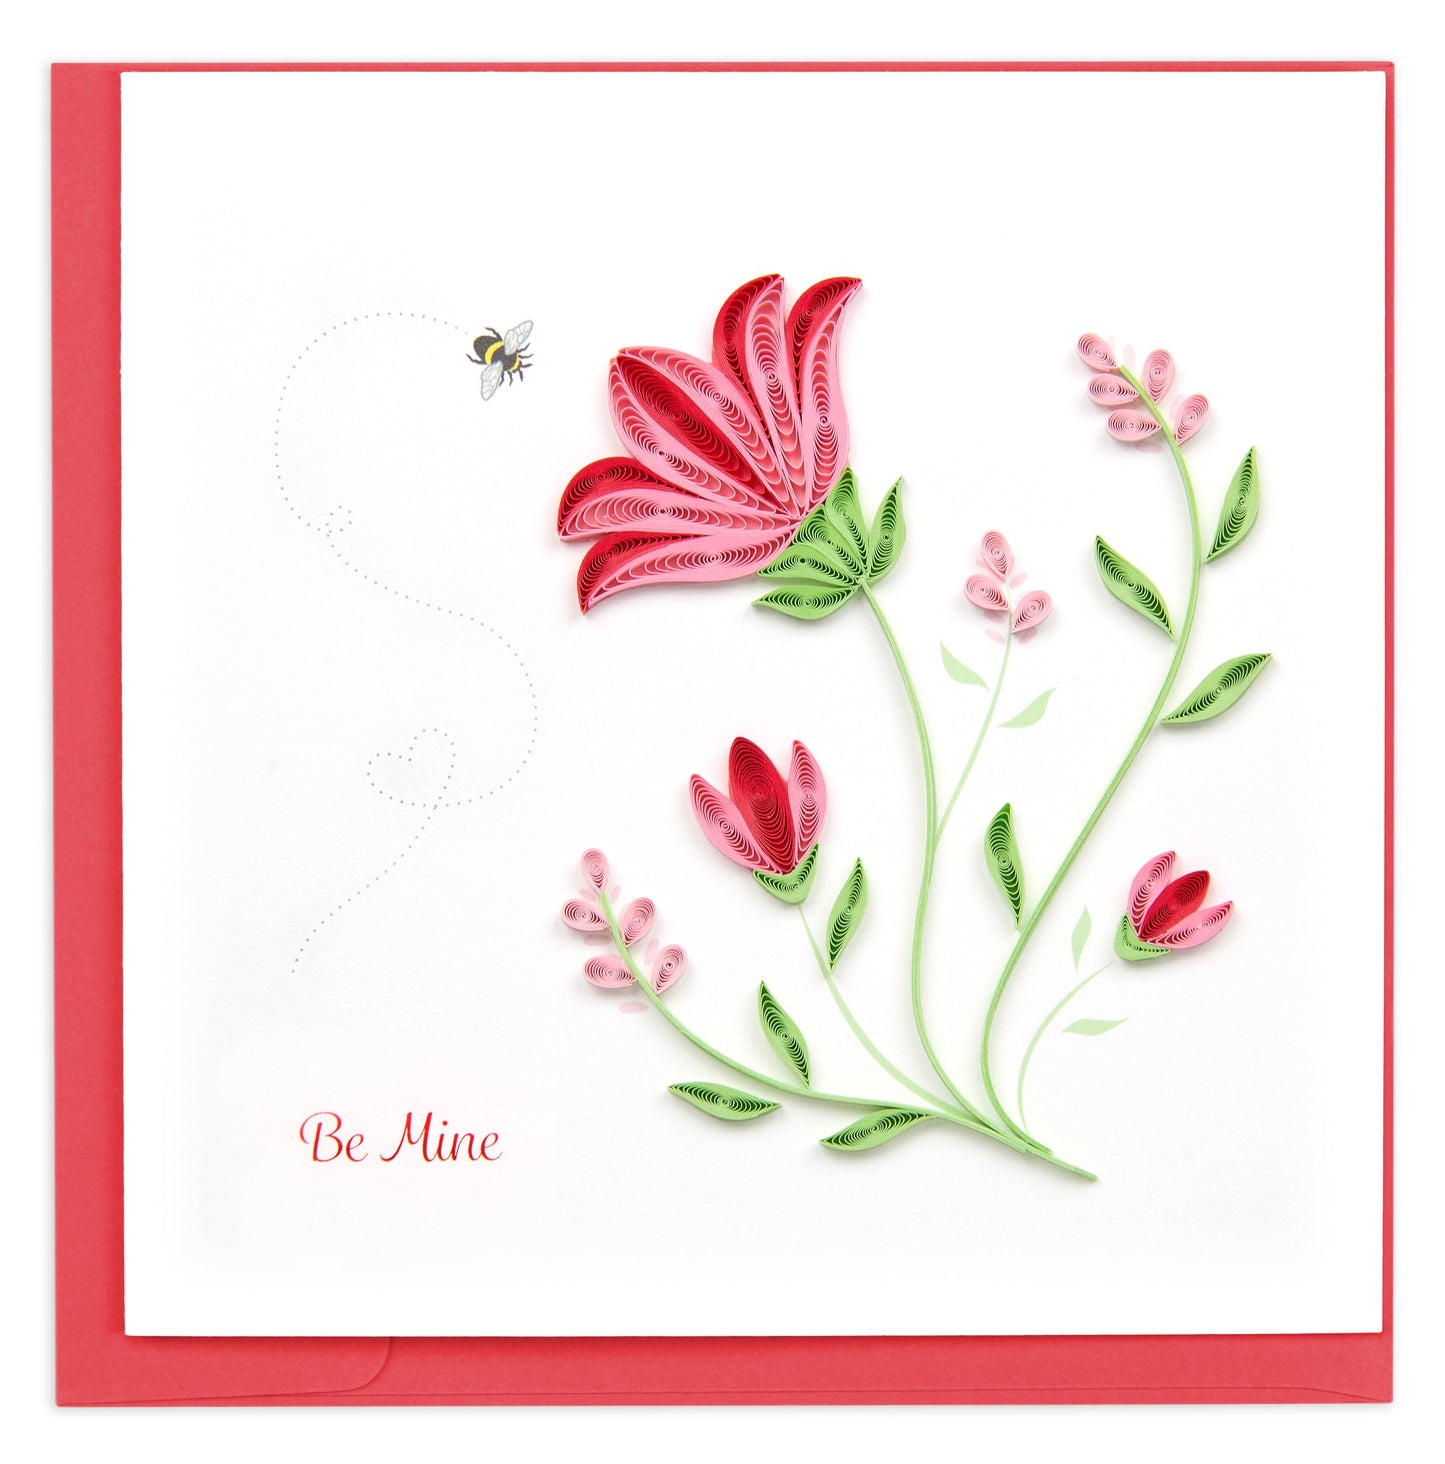 Quilled "Be Mine" Valentine Greeting Card